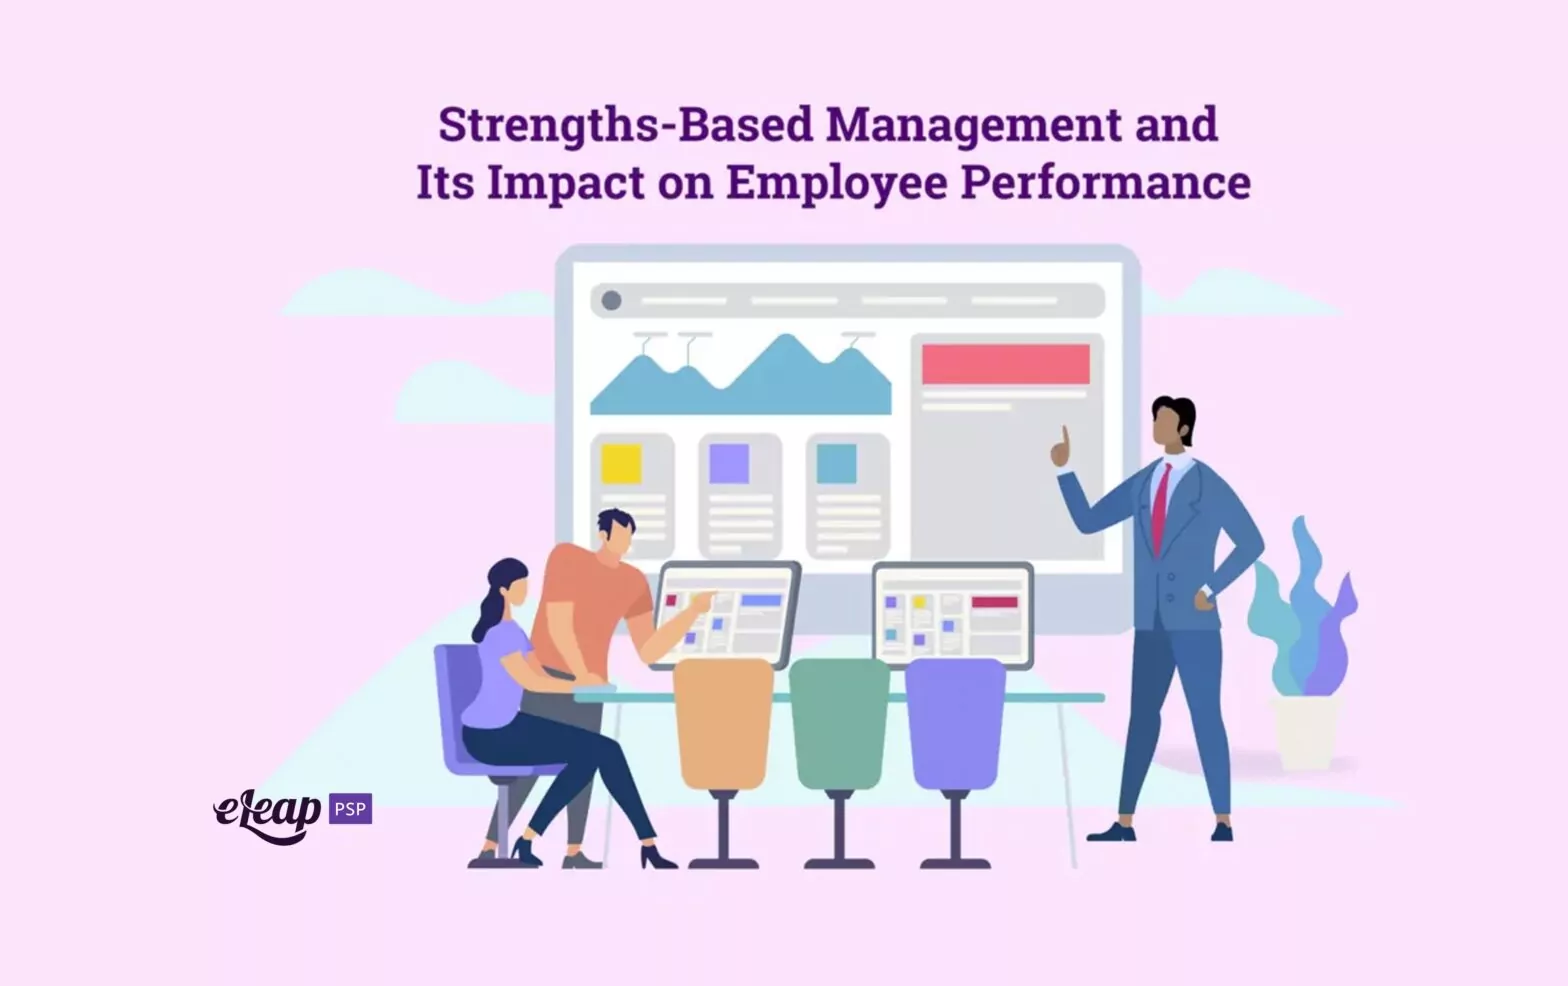 Strengths-Based Management and Its Impact on Employee Performance